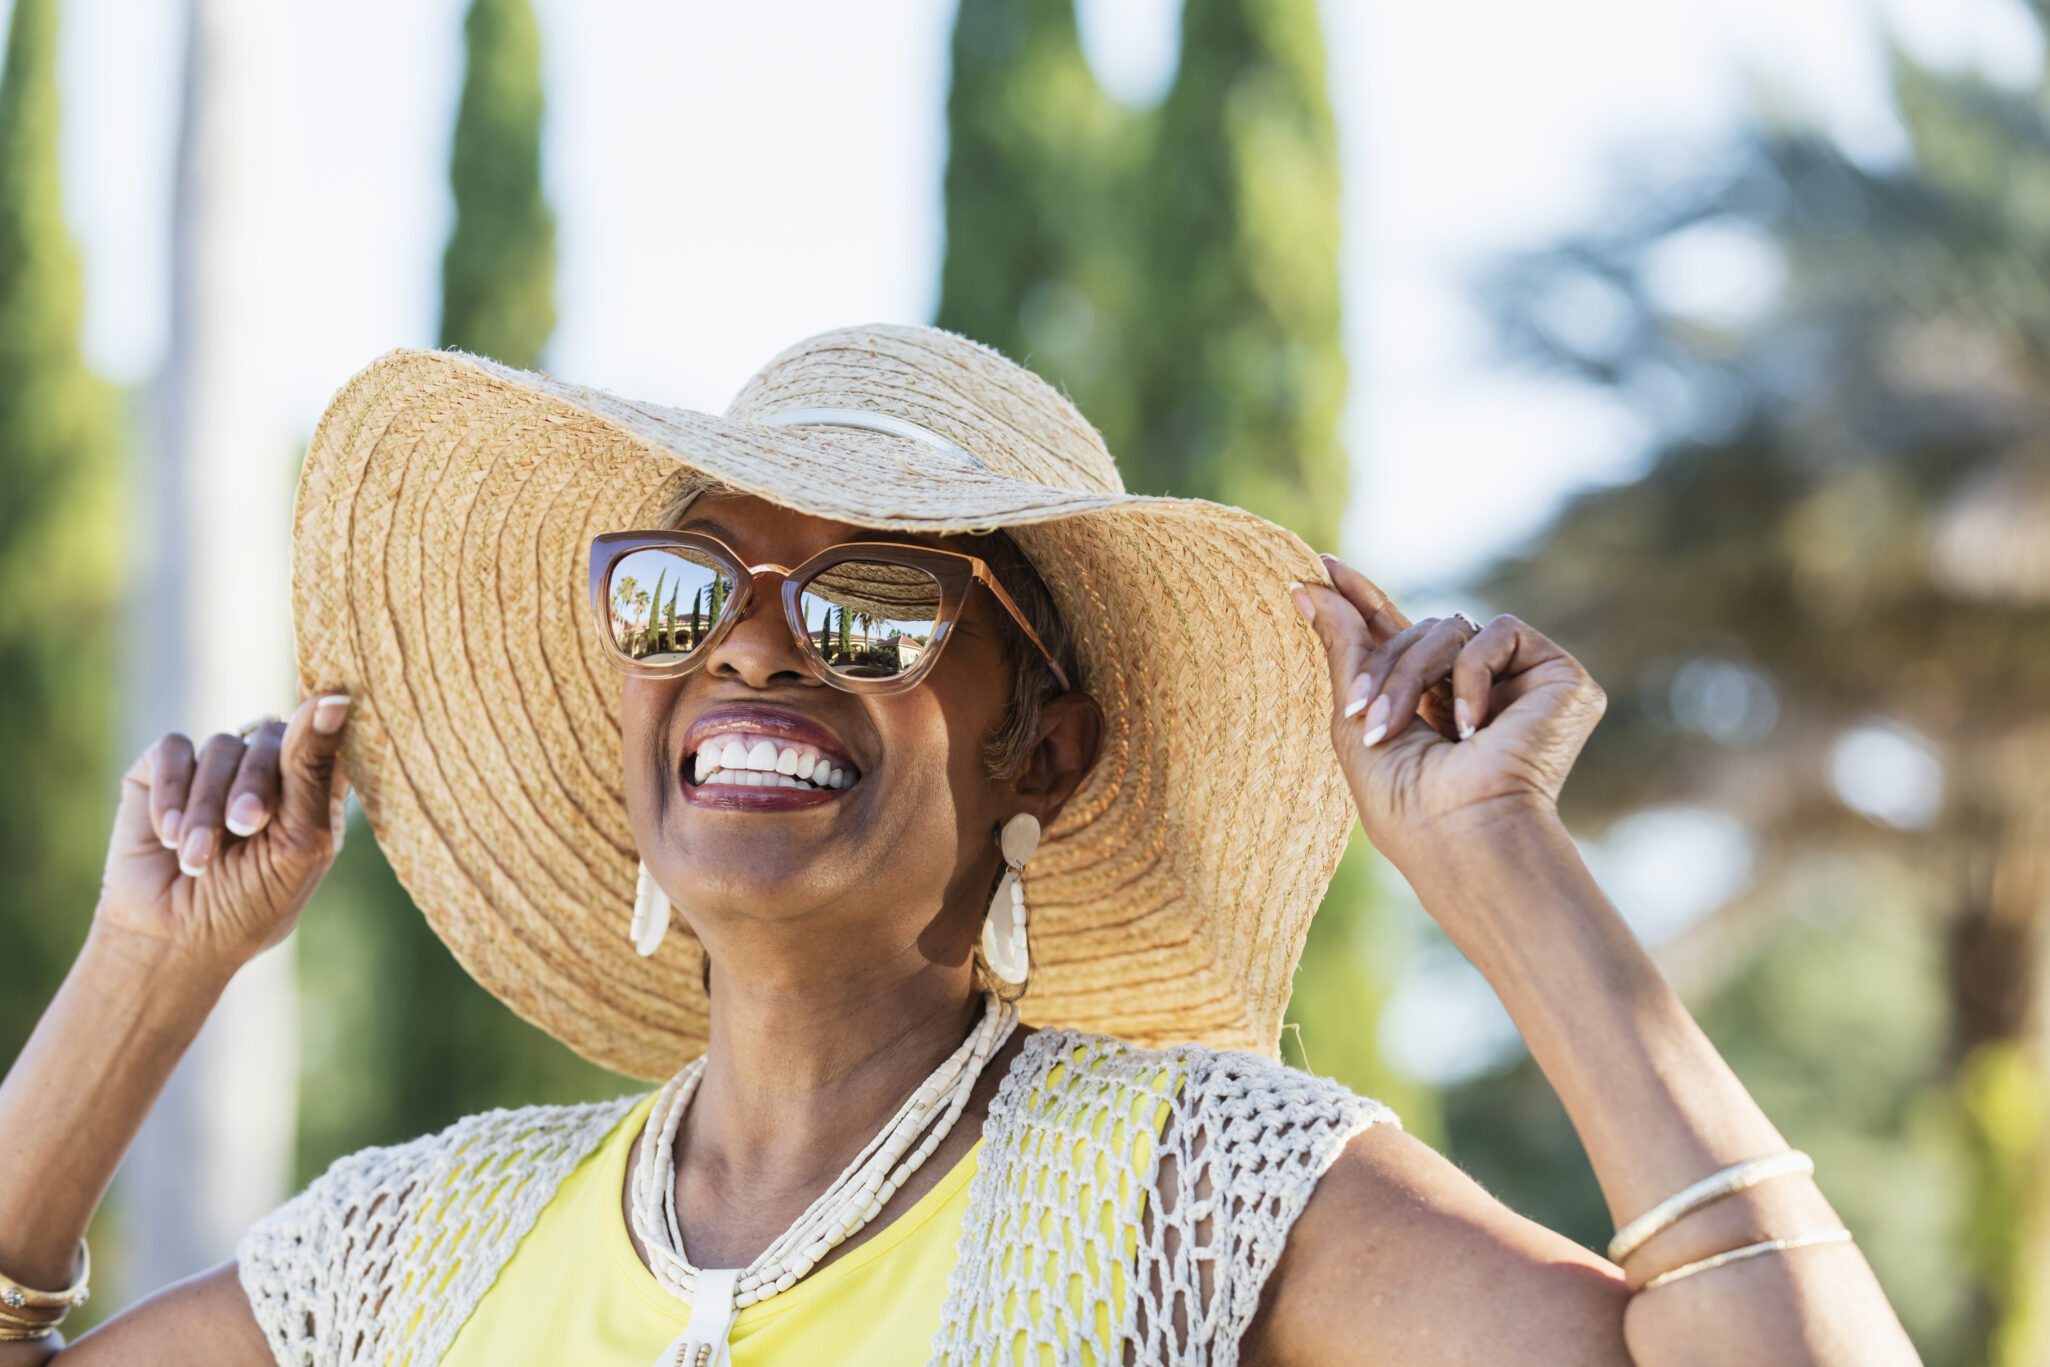 A women smiling widely while wearing sunglasses and touching the brim of her sun hat